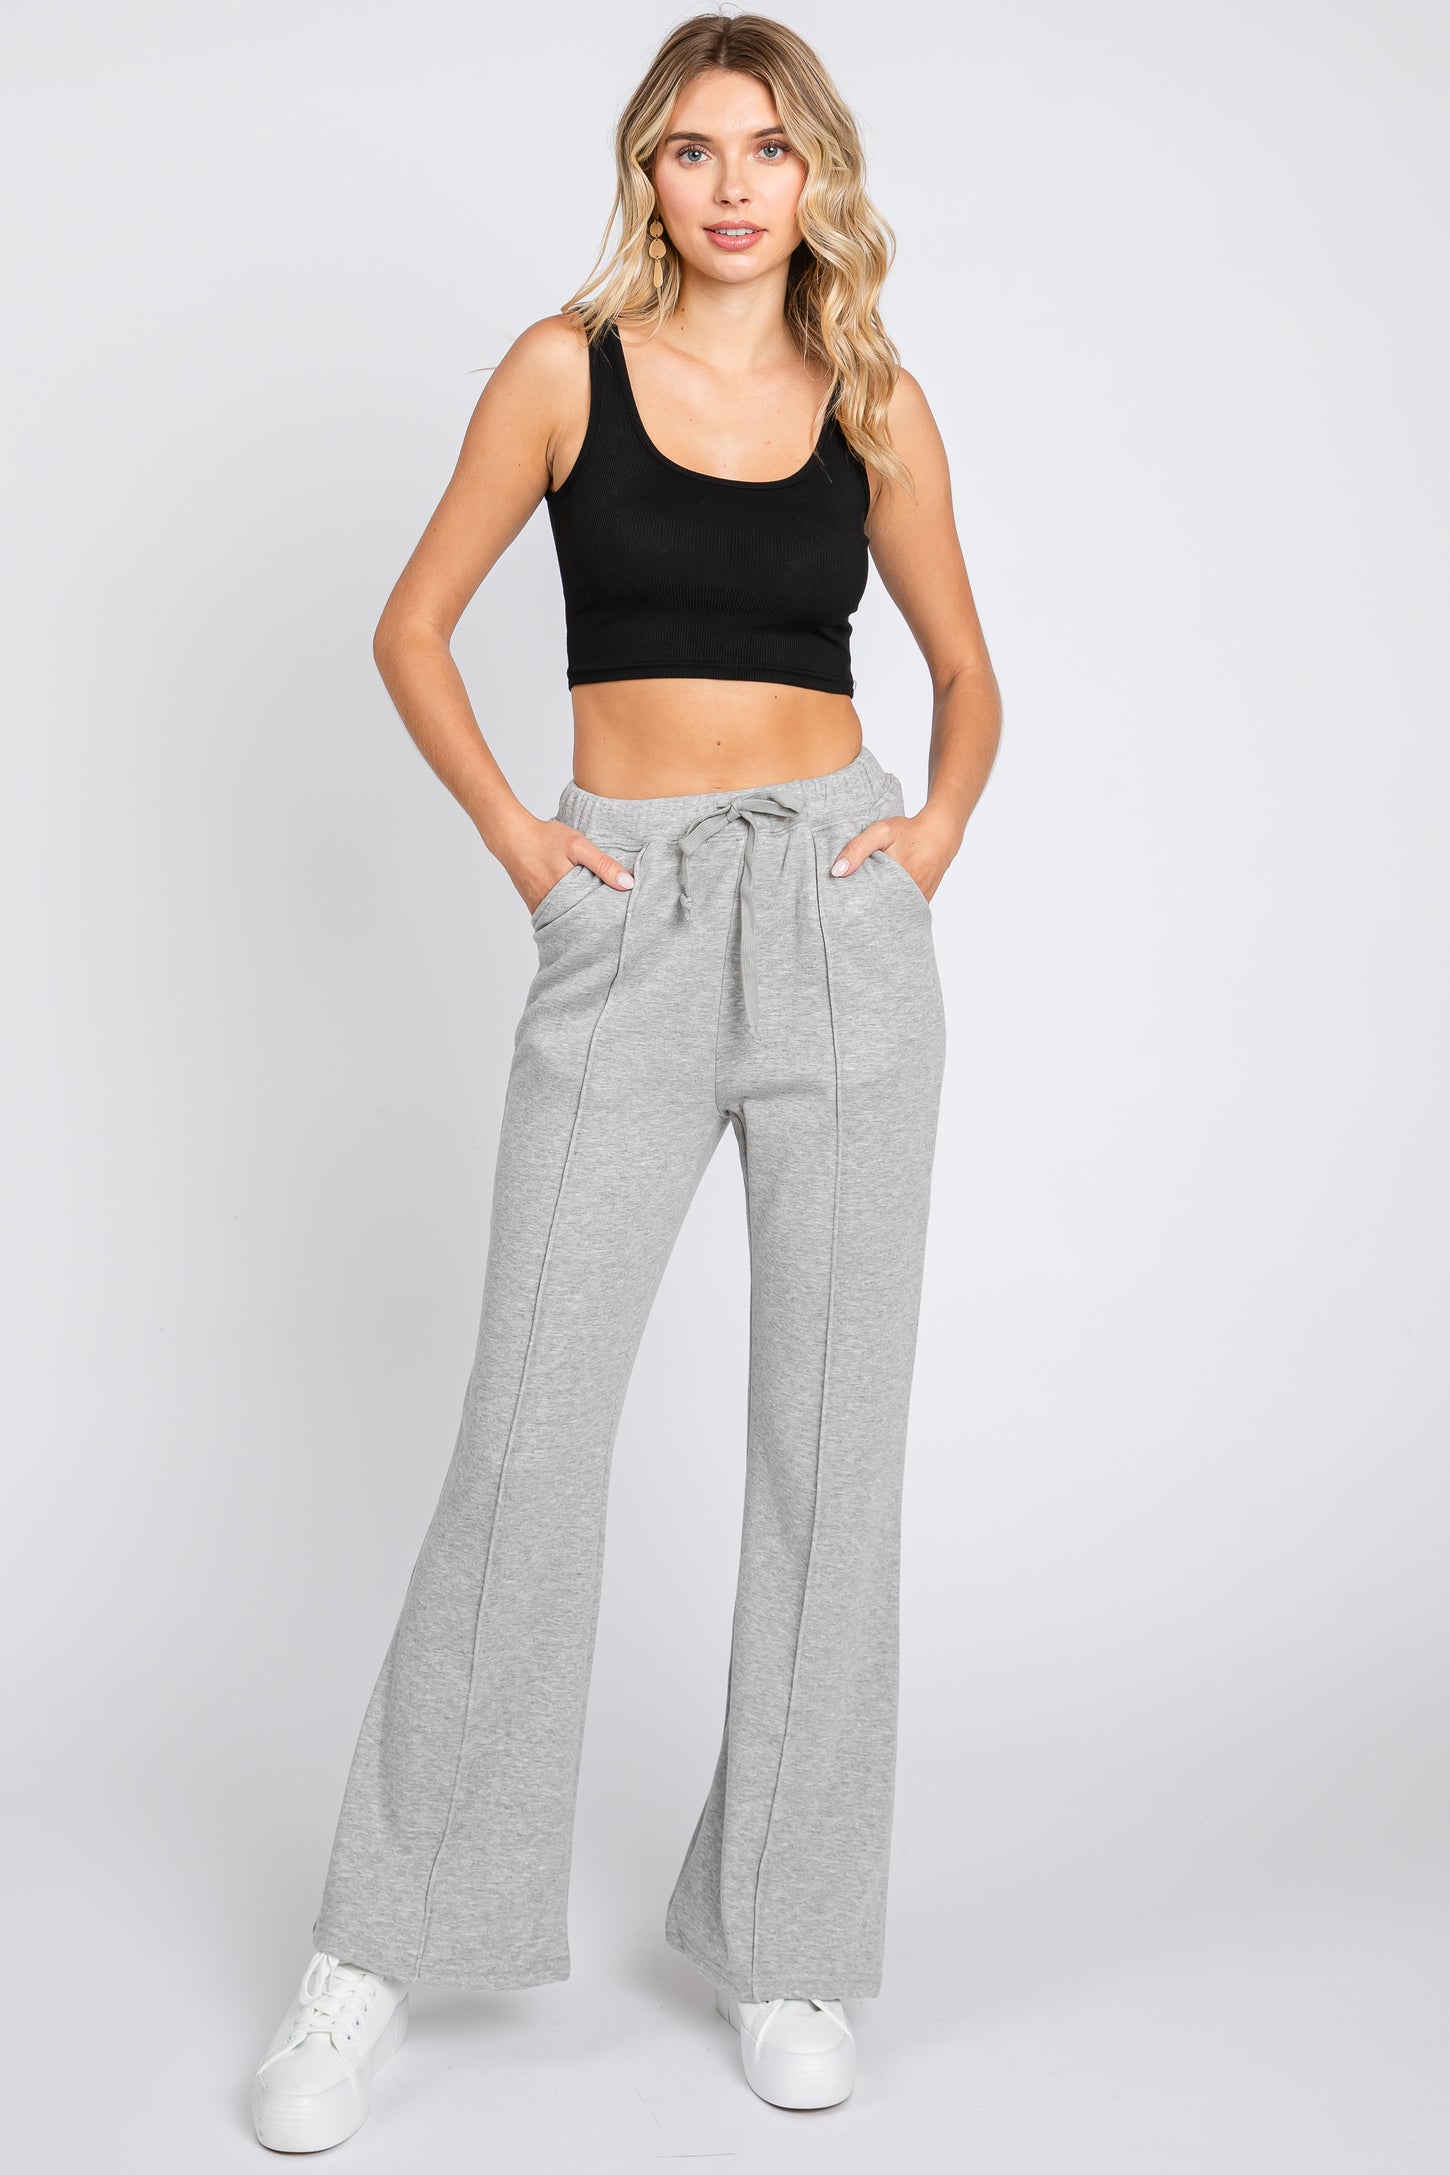 Heather Grey Faux Fur Lined Maternity Flare Lounge Pants– PinkBlush